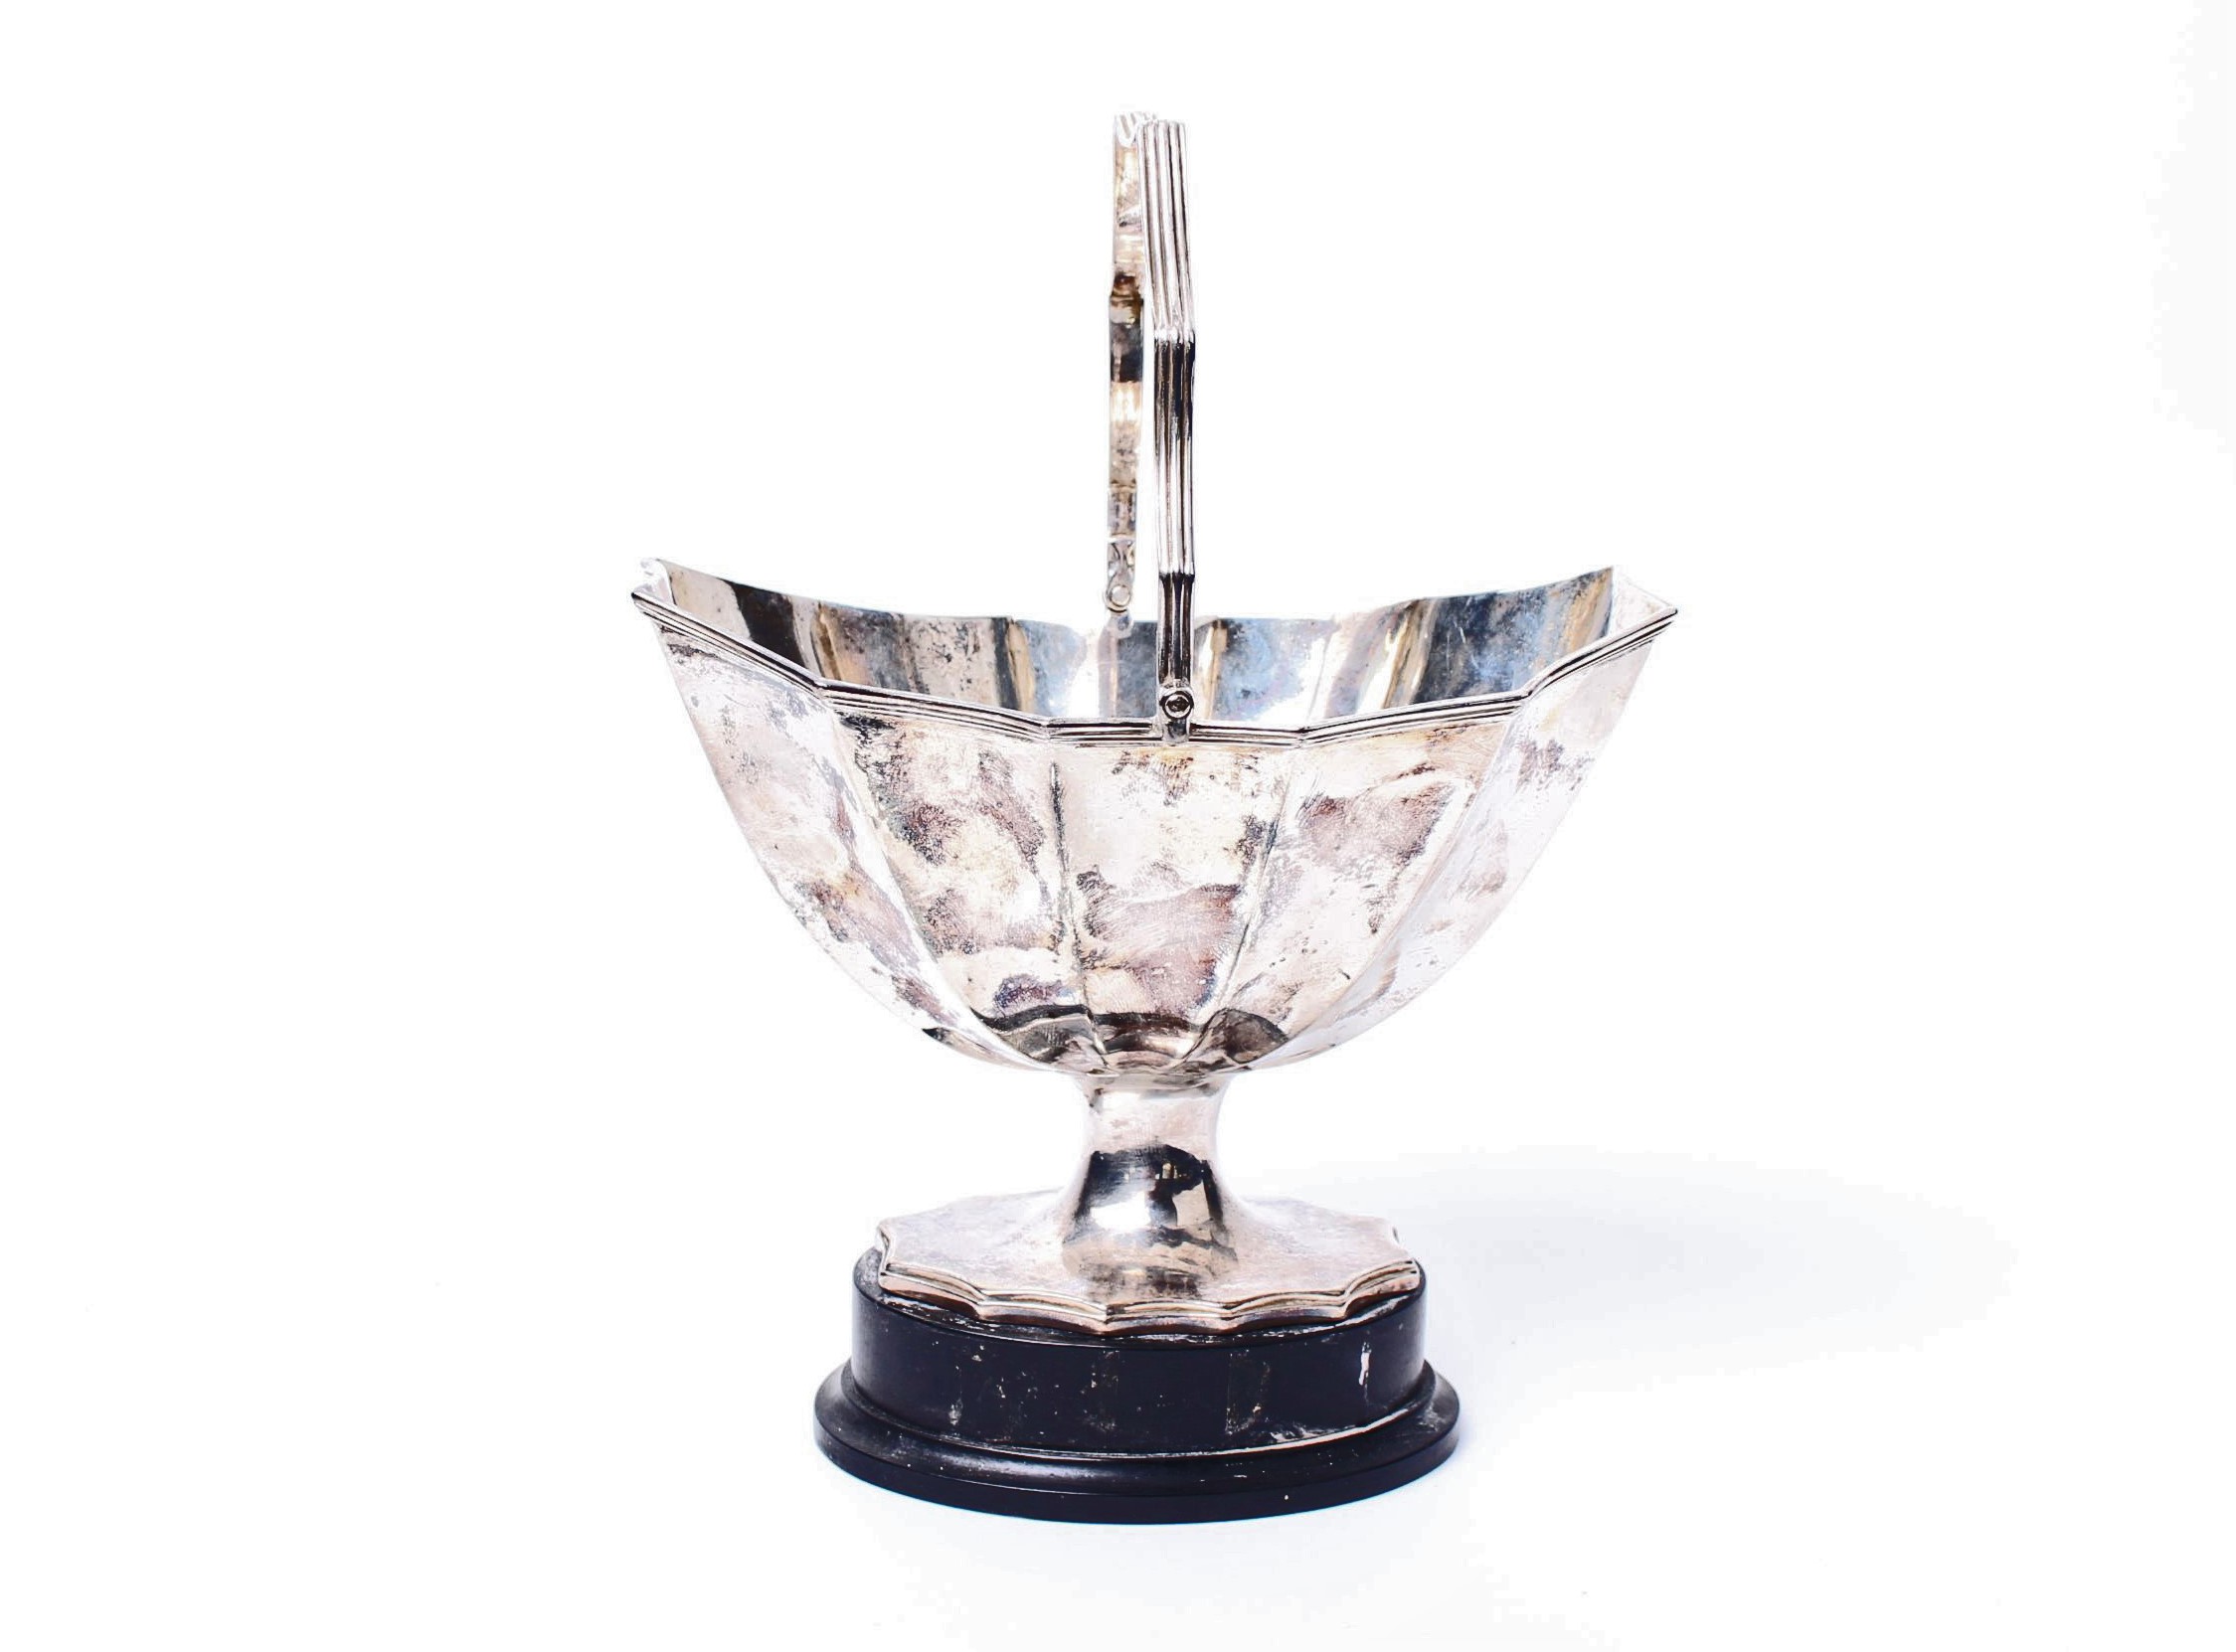 A Georgian sterling silver scalloped shaped footed bowl, with swing handle on ebony base, by William